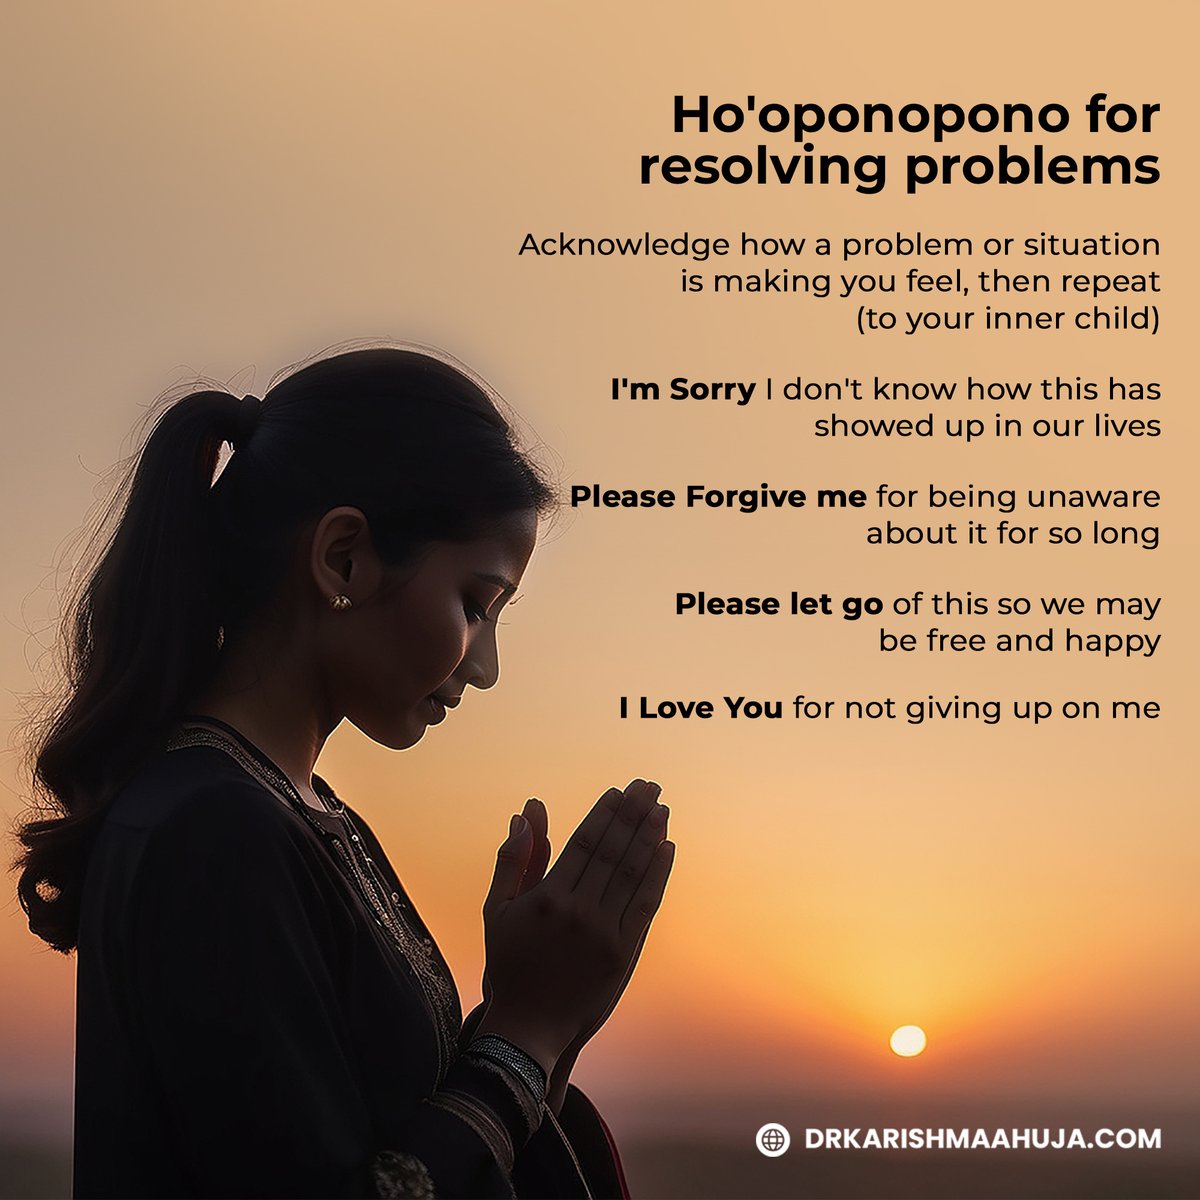 Ho'oponopono helps resolve problems and restore inner peace. Acknowledge your feelings and say to your inner child: 'I'm sorry,' 'Please forgive me,' 'Thank you,' 'I love you.' Clear negative energy and invite healing. Start your journey: drkarishmaahuja.com/product/hoopon… #drkarishmaahuja